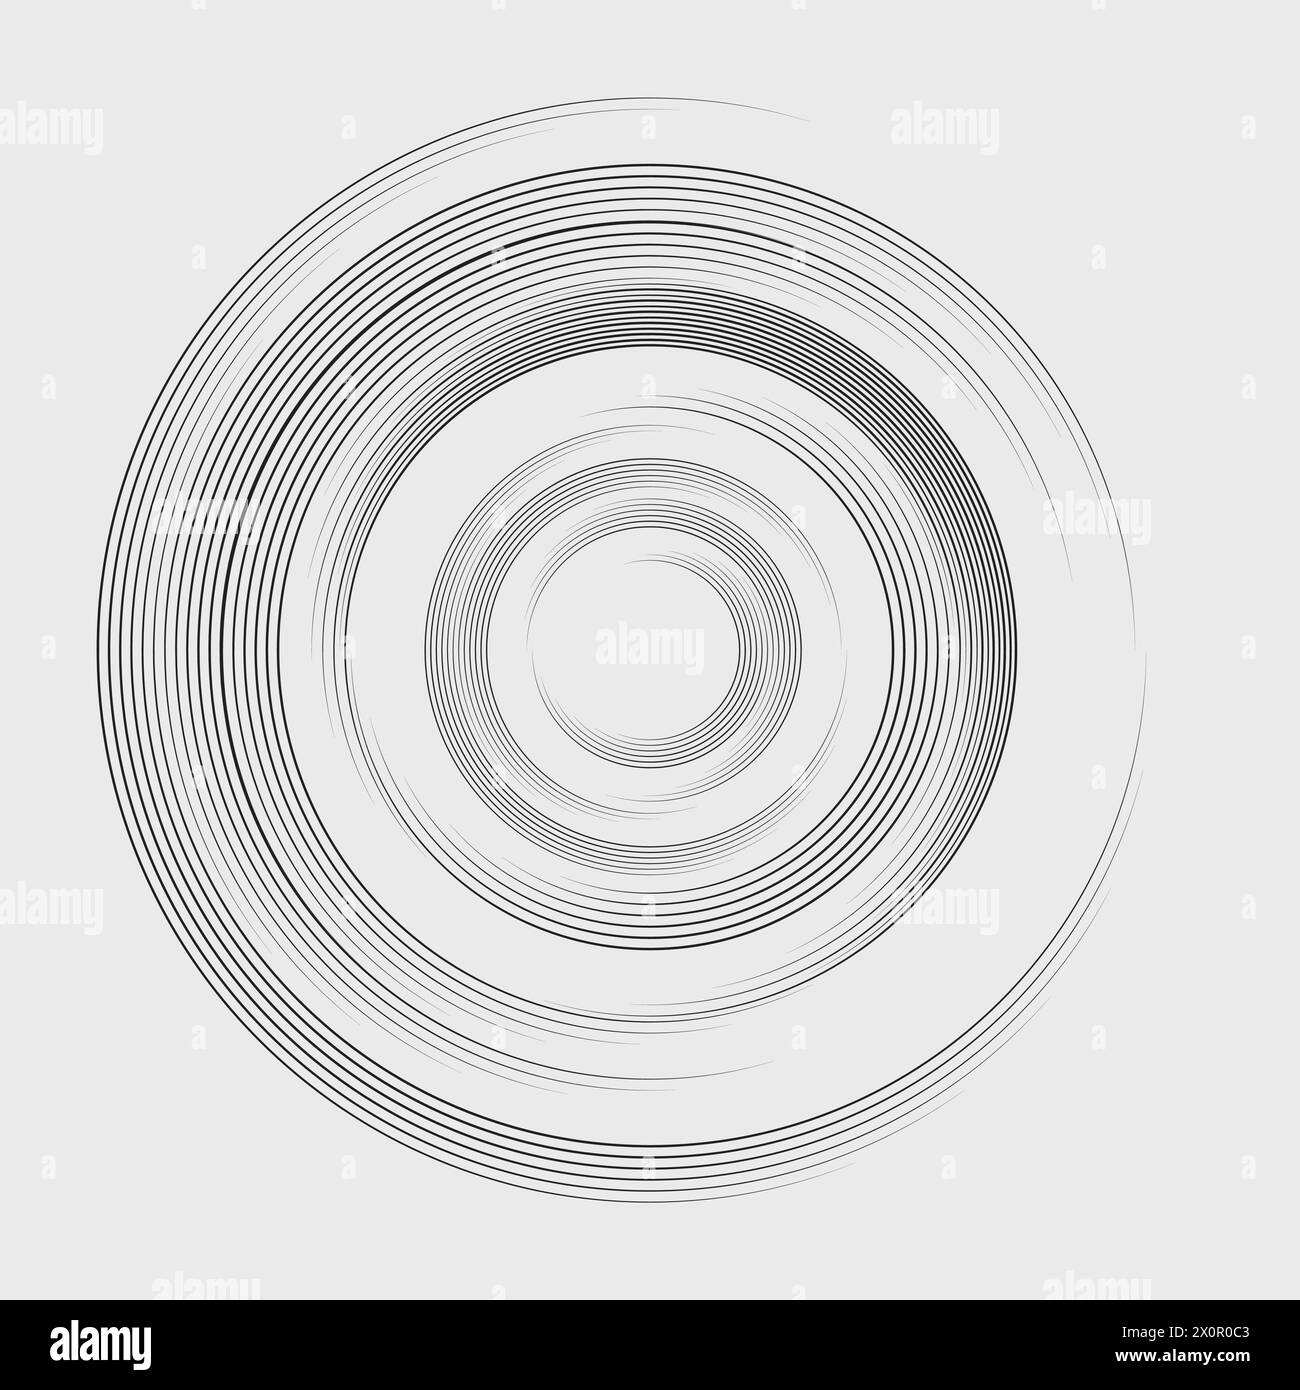 Set of black thick speed lines. Speed lines in circle form. Geometric art. Design element for logo, tattoo, web pages, template, abstract vector backg Stock Vector